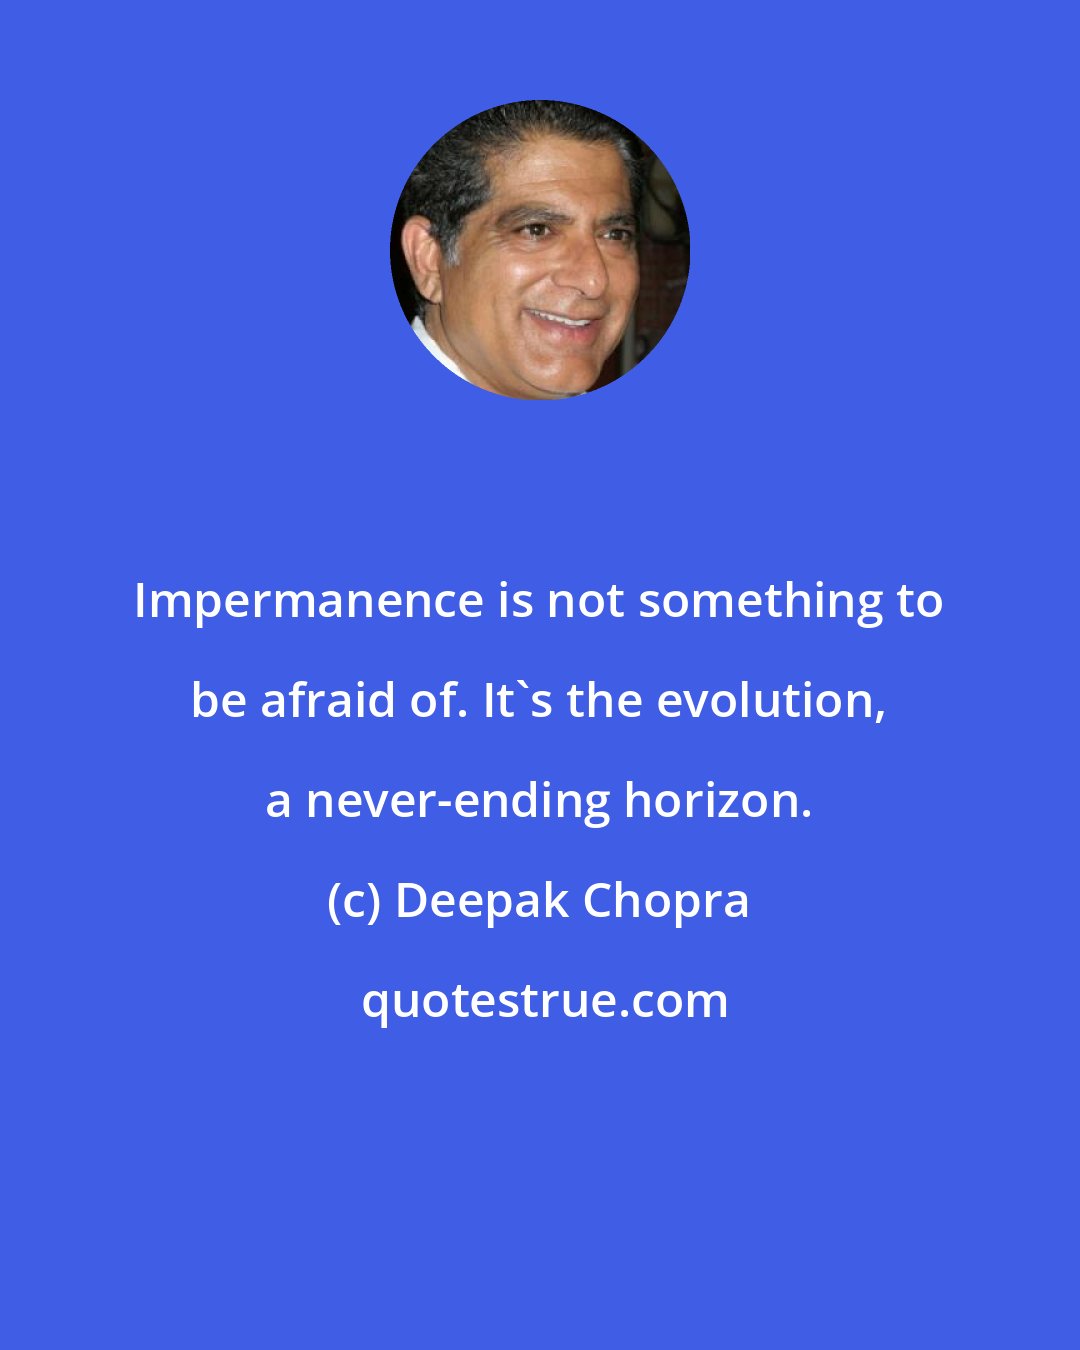 Deepak Chopra: Impermanence is not something to be afraid of. It's the evolution, a never-ending horizon.